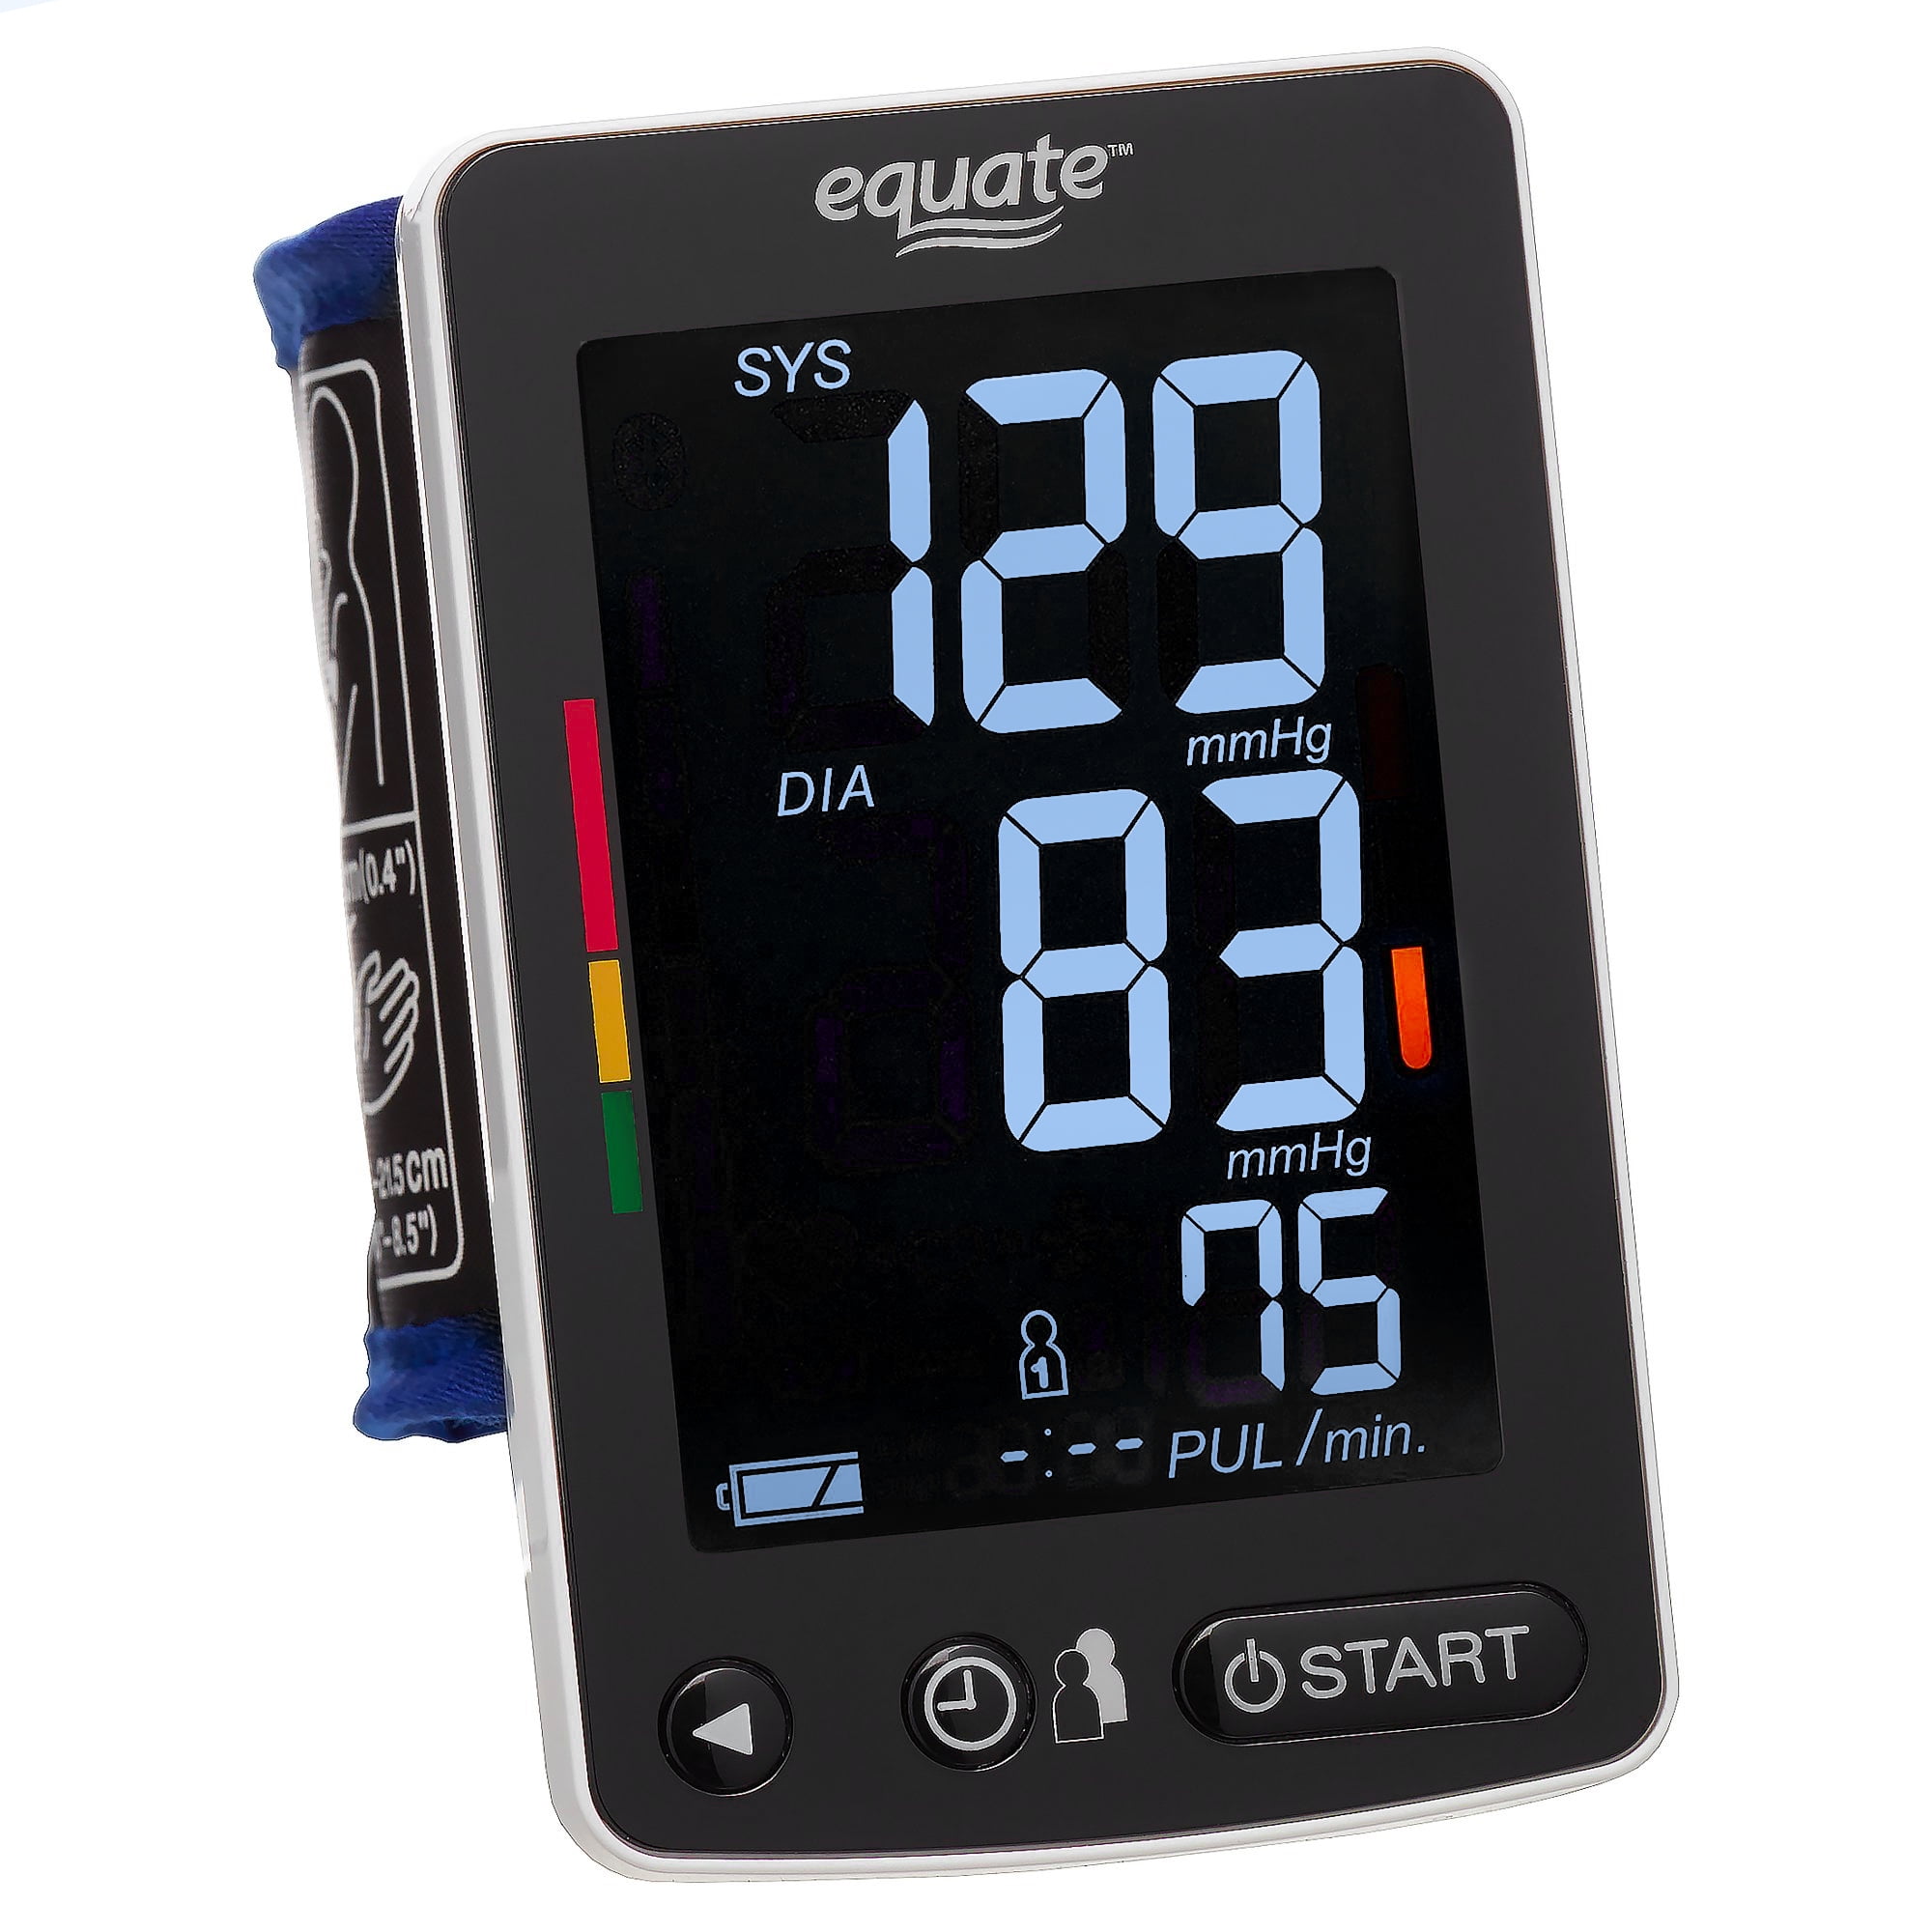 Equate BP-6500 Wrist Blood Pressure Monitor with Bluetooth Easy Read LCD  Display